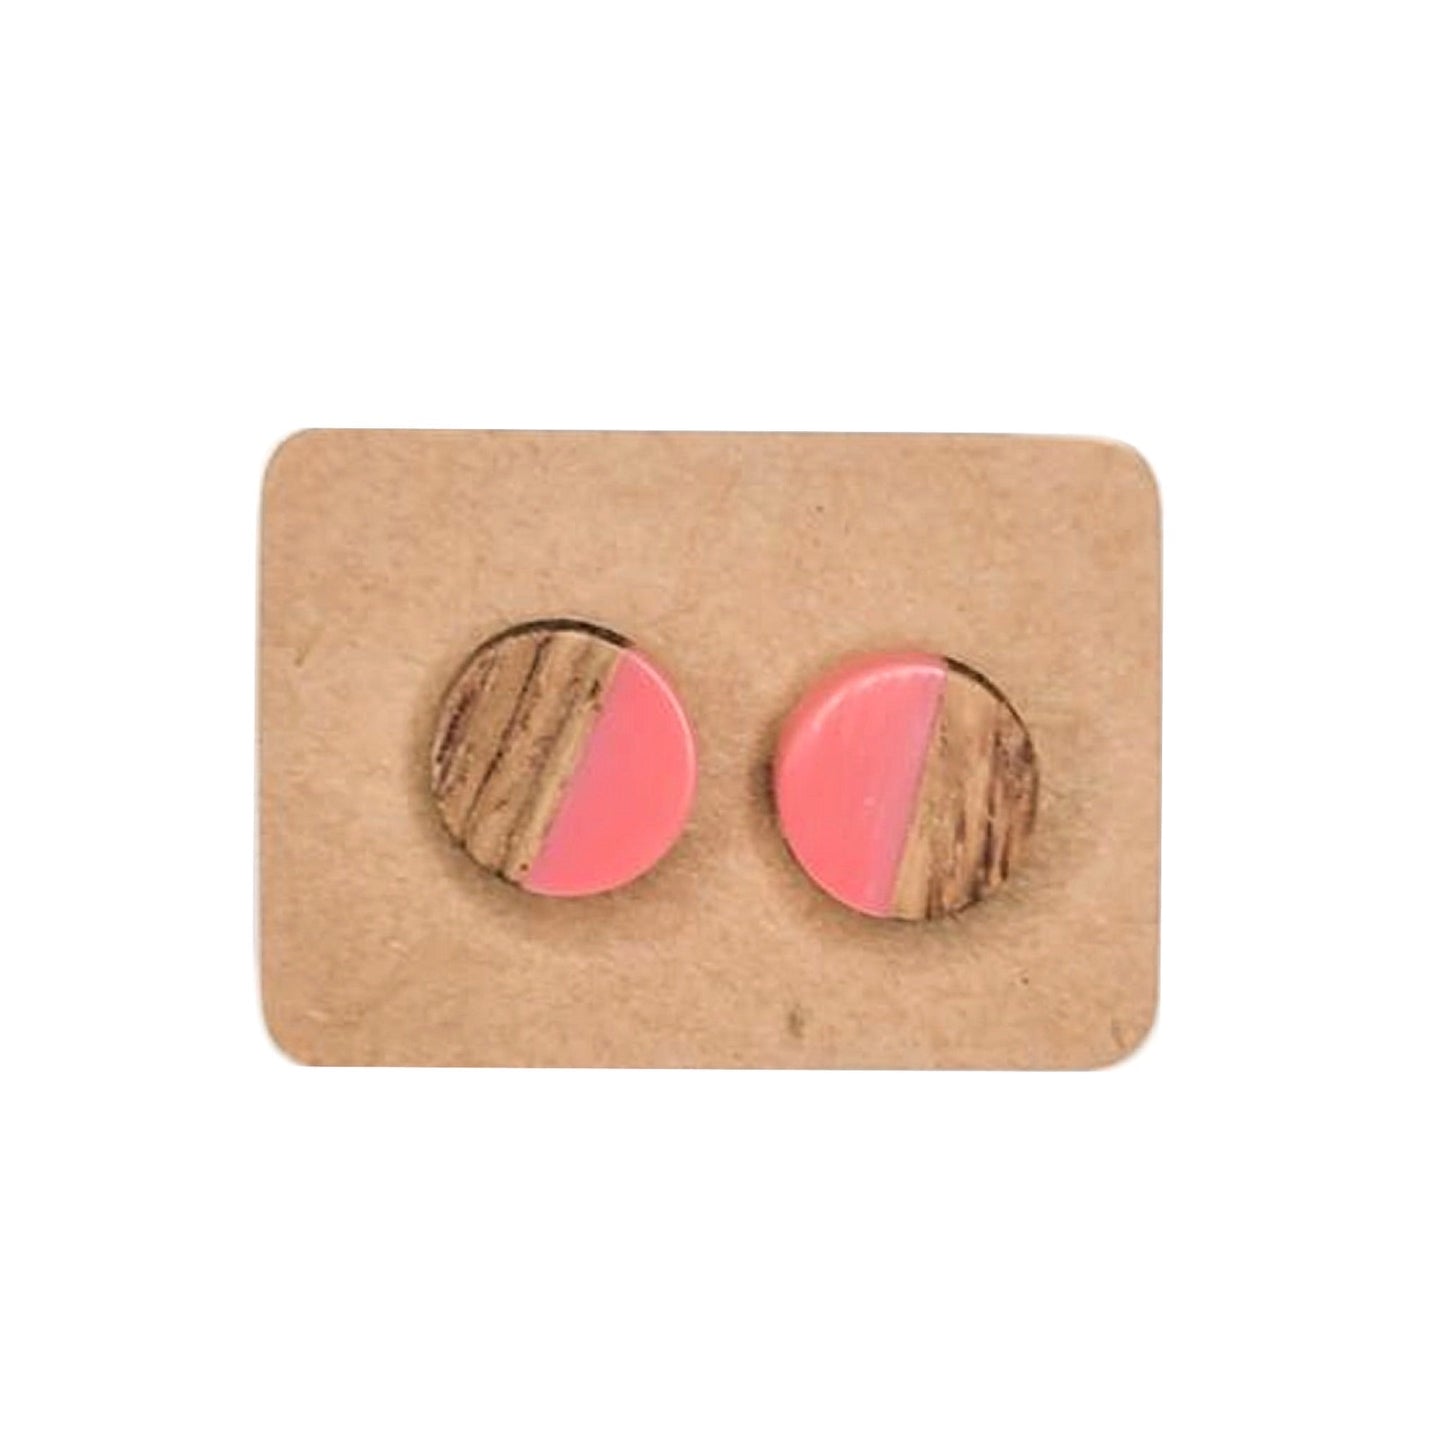 Let The Good Times Roll Earrings in Pink